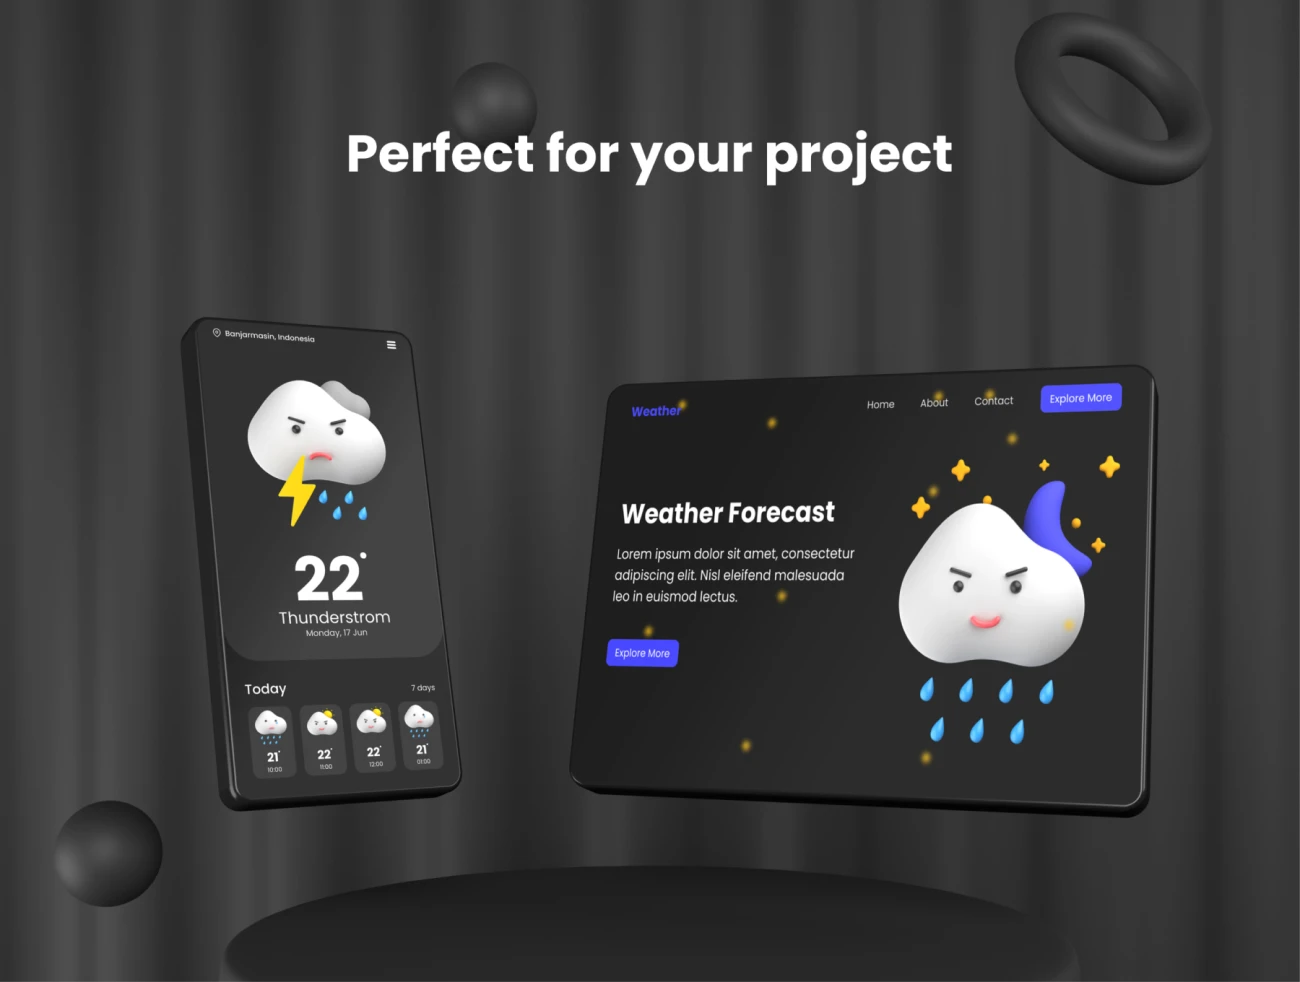 3D拟人情绪化天气图标24款素材下载 3D Weather Icons Emoticons Pack .figma .png .psd插图9